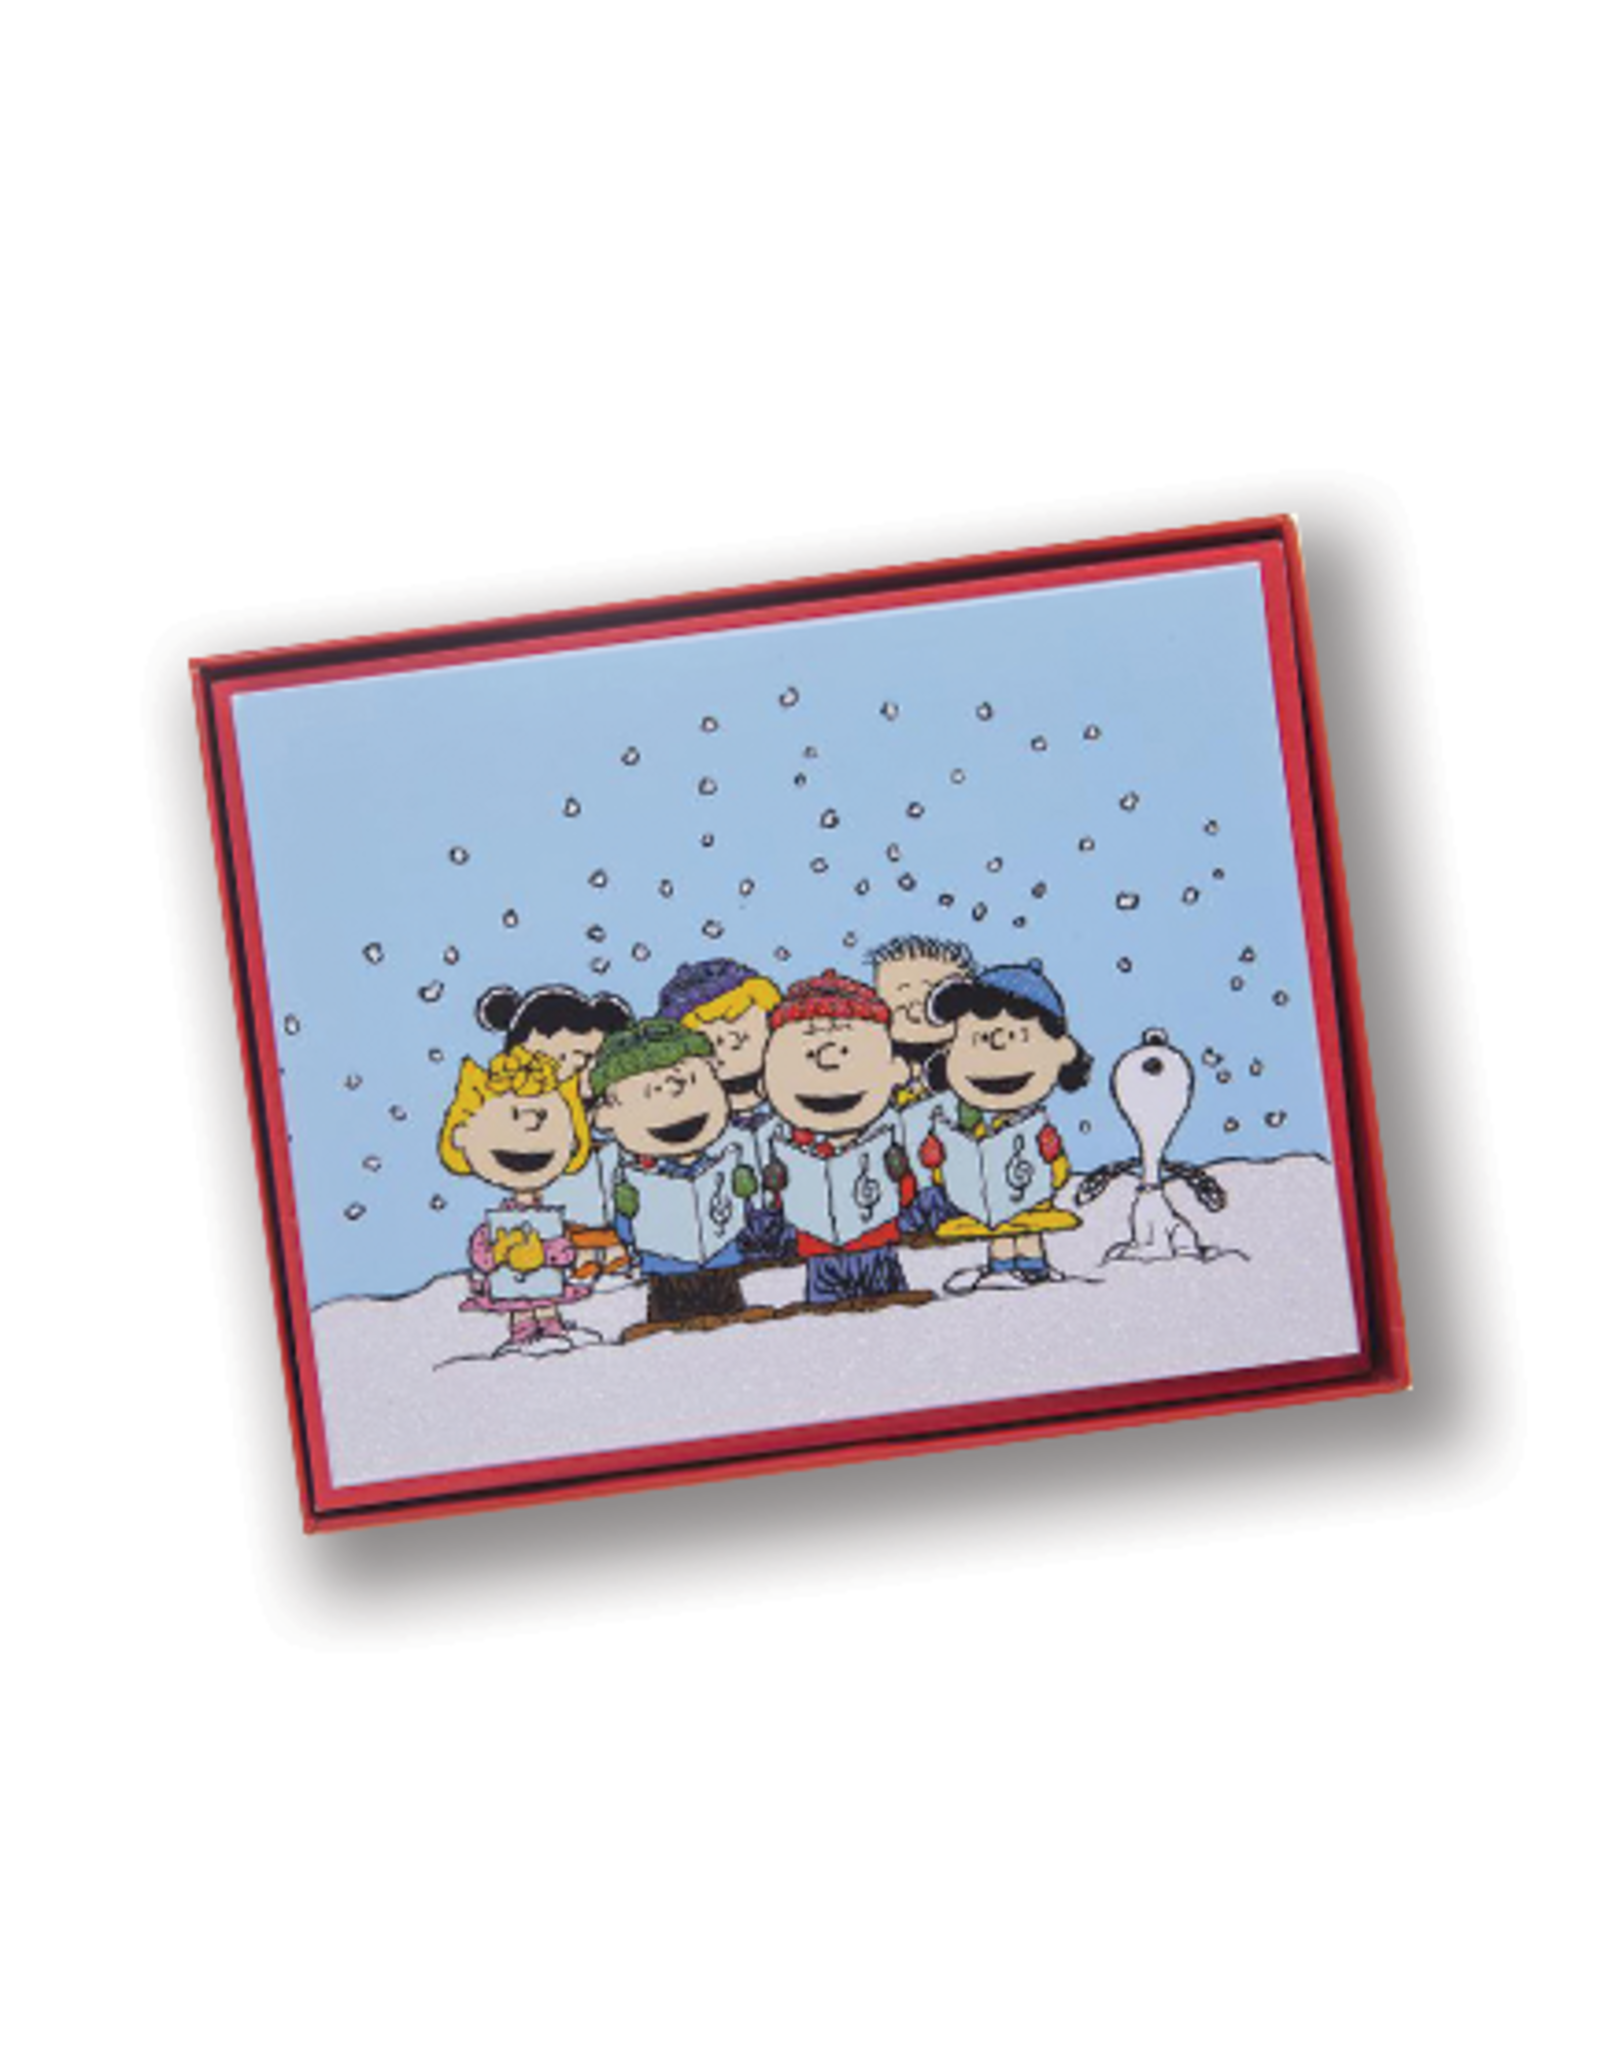 Peanuts "Choir" Holiday Boxed Cards (15 Cards)